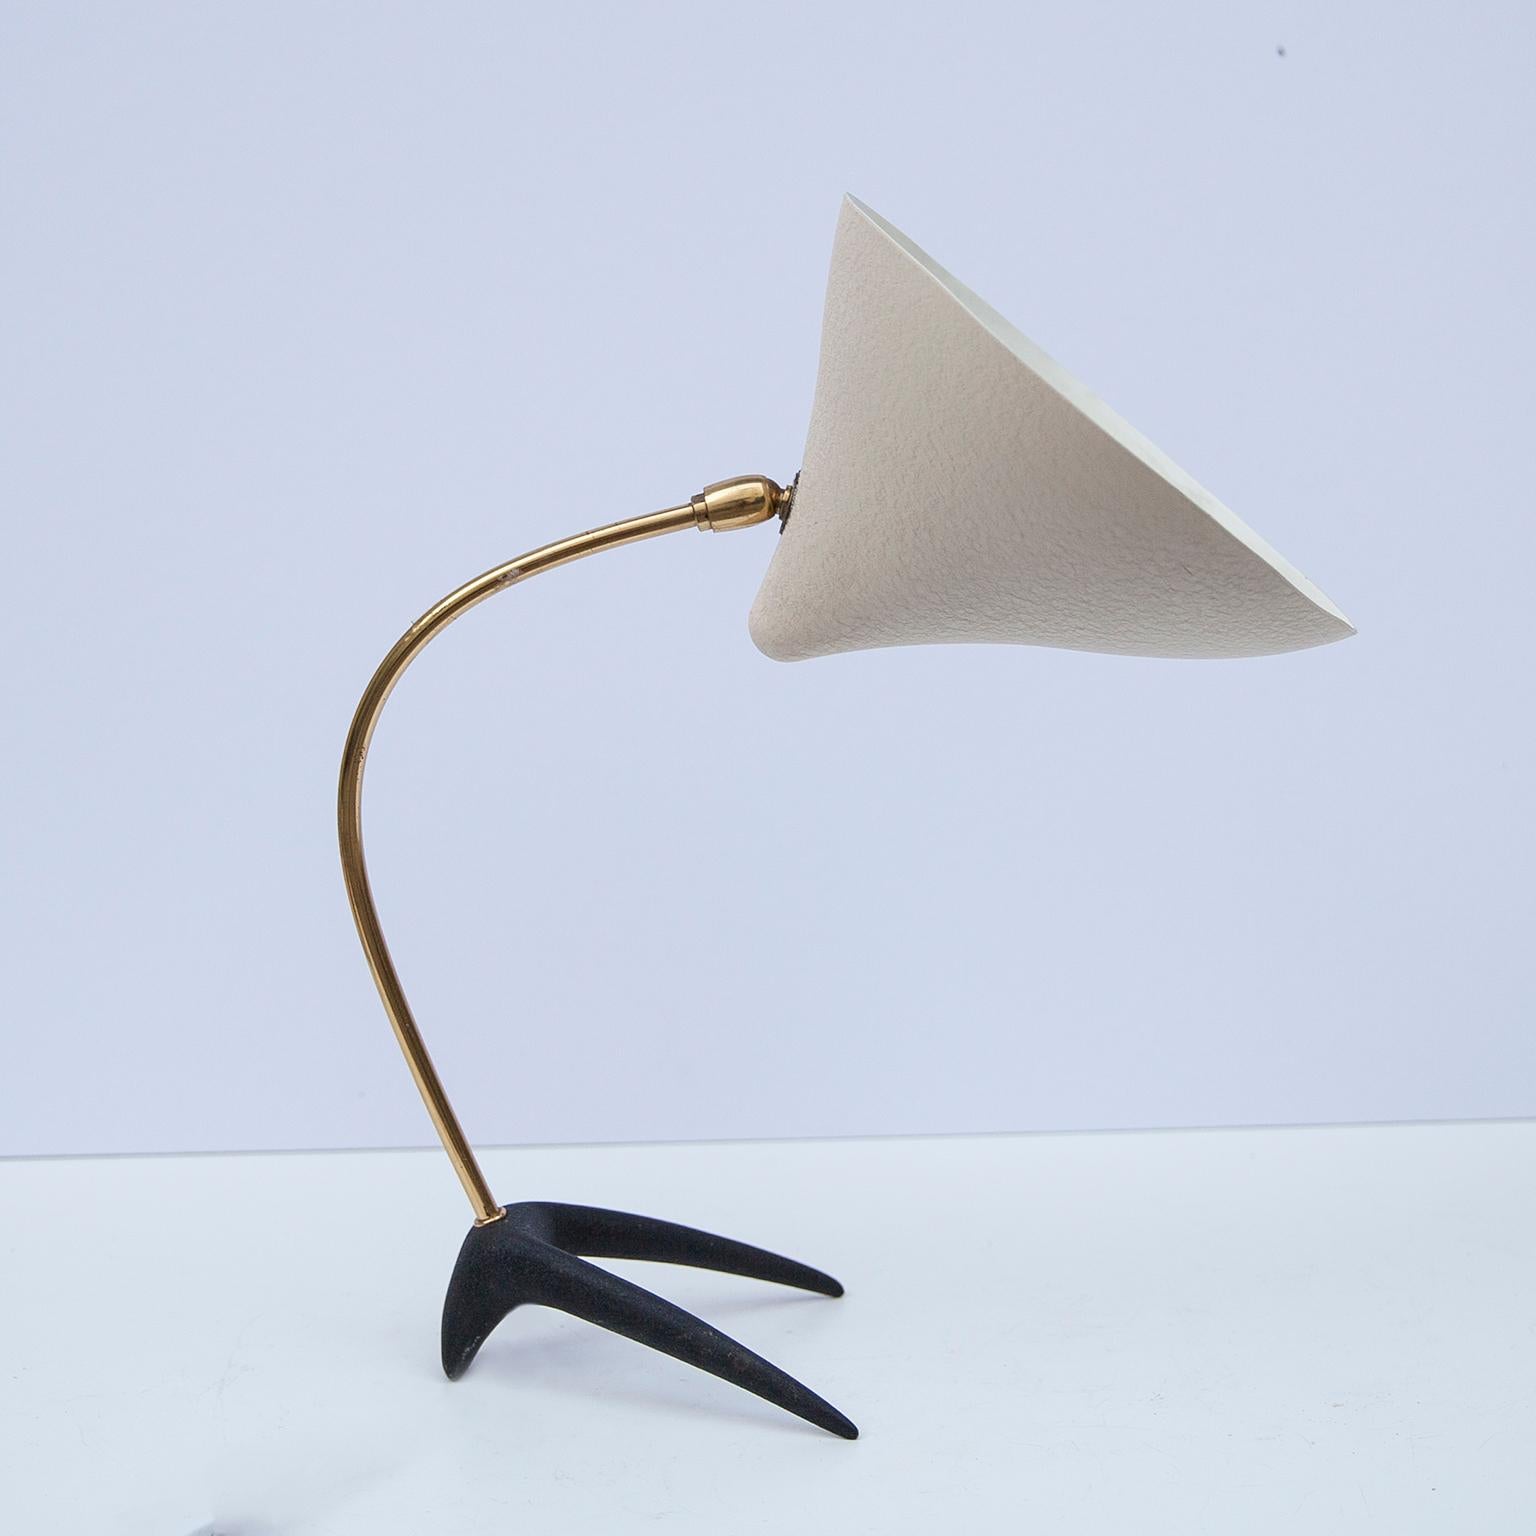 Vintage table lamp with a cast iron foot and a curved brass base, designed by Louis Kalff in the 1950s for Philips Netherland. The conical shade was made of aluminium, white lacquered. The table lamp has an on/off switch and an original E 27